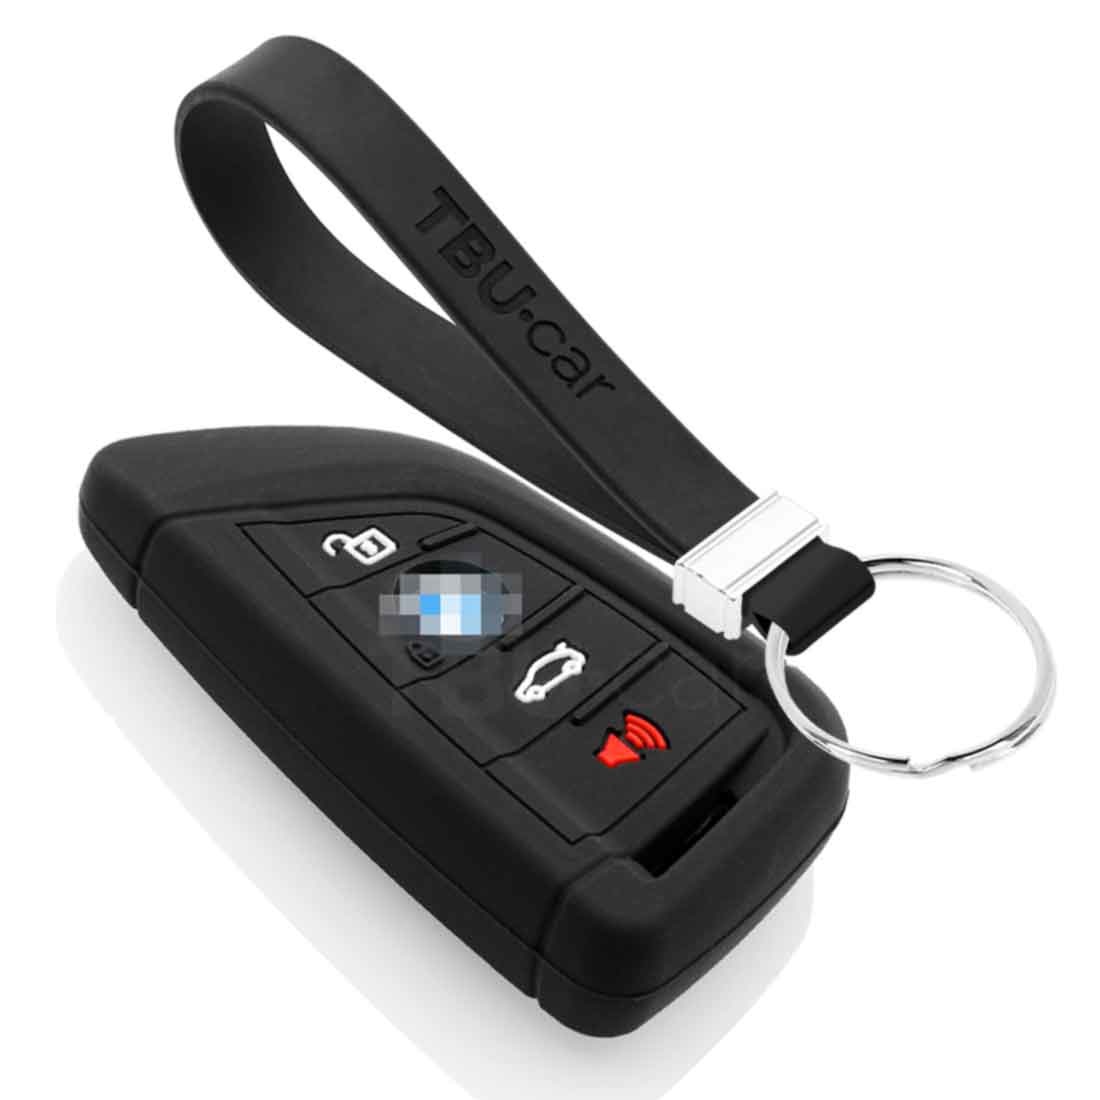 Bmw Car Key Cover Inspirations | Best bmw review i-jp